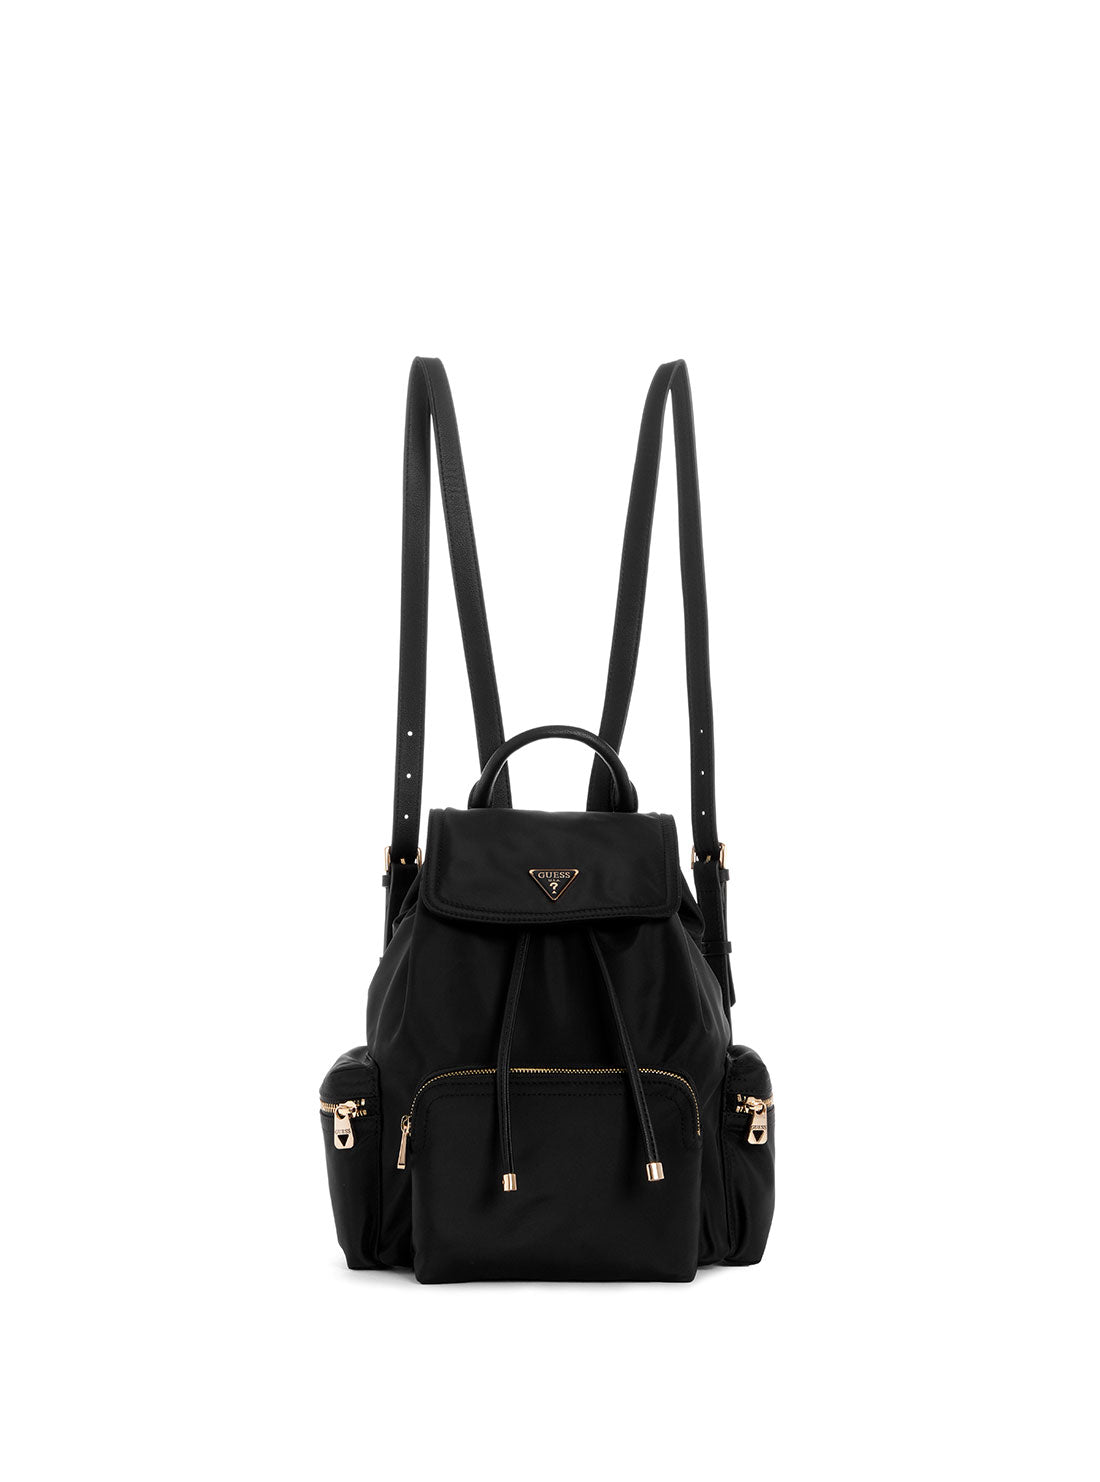 GUESS Women's Eco Black Gemma Backpack EYG839532 Front View